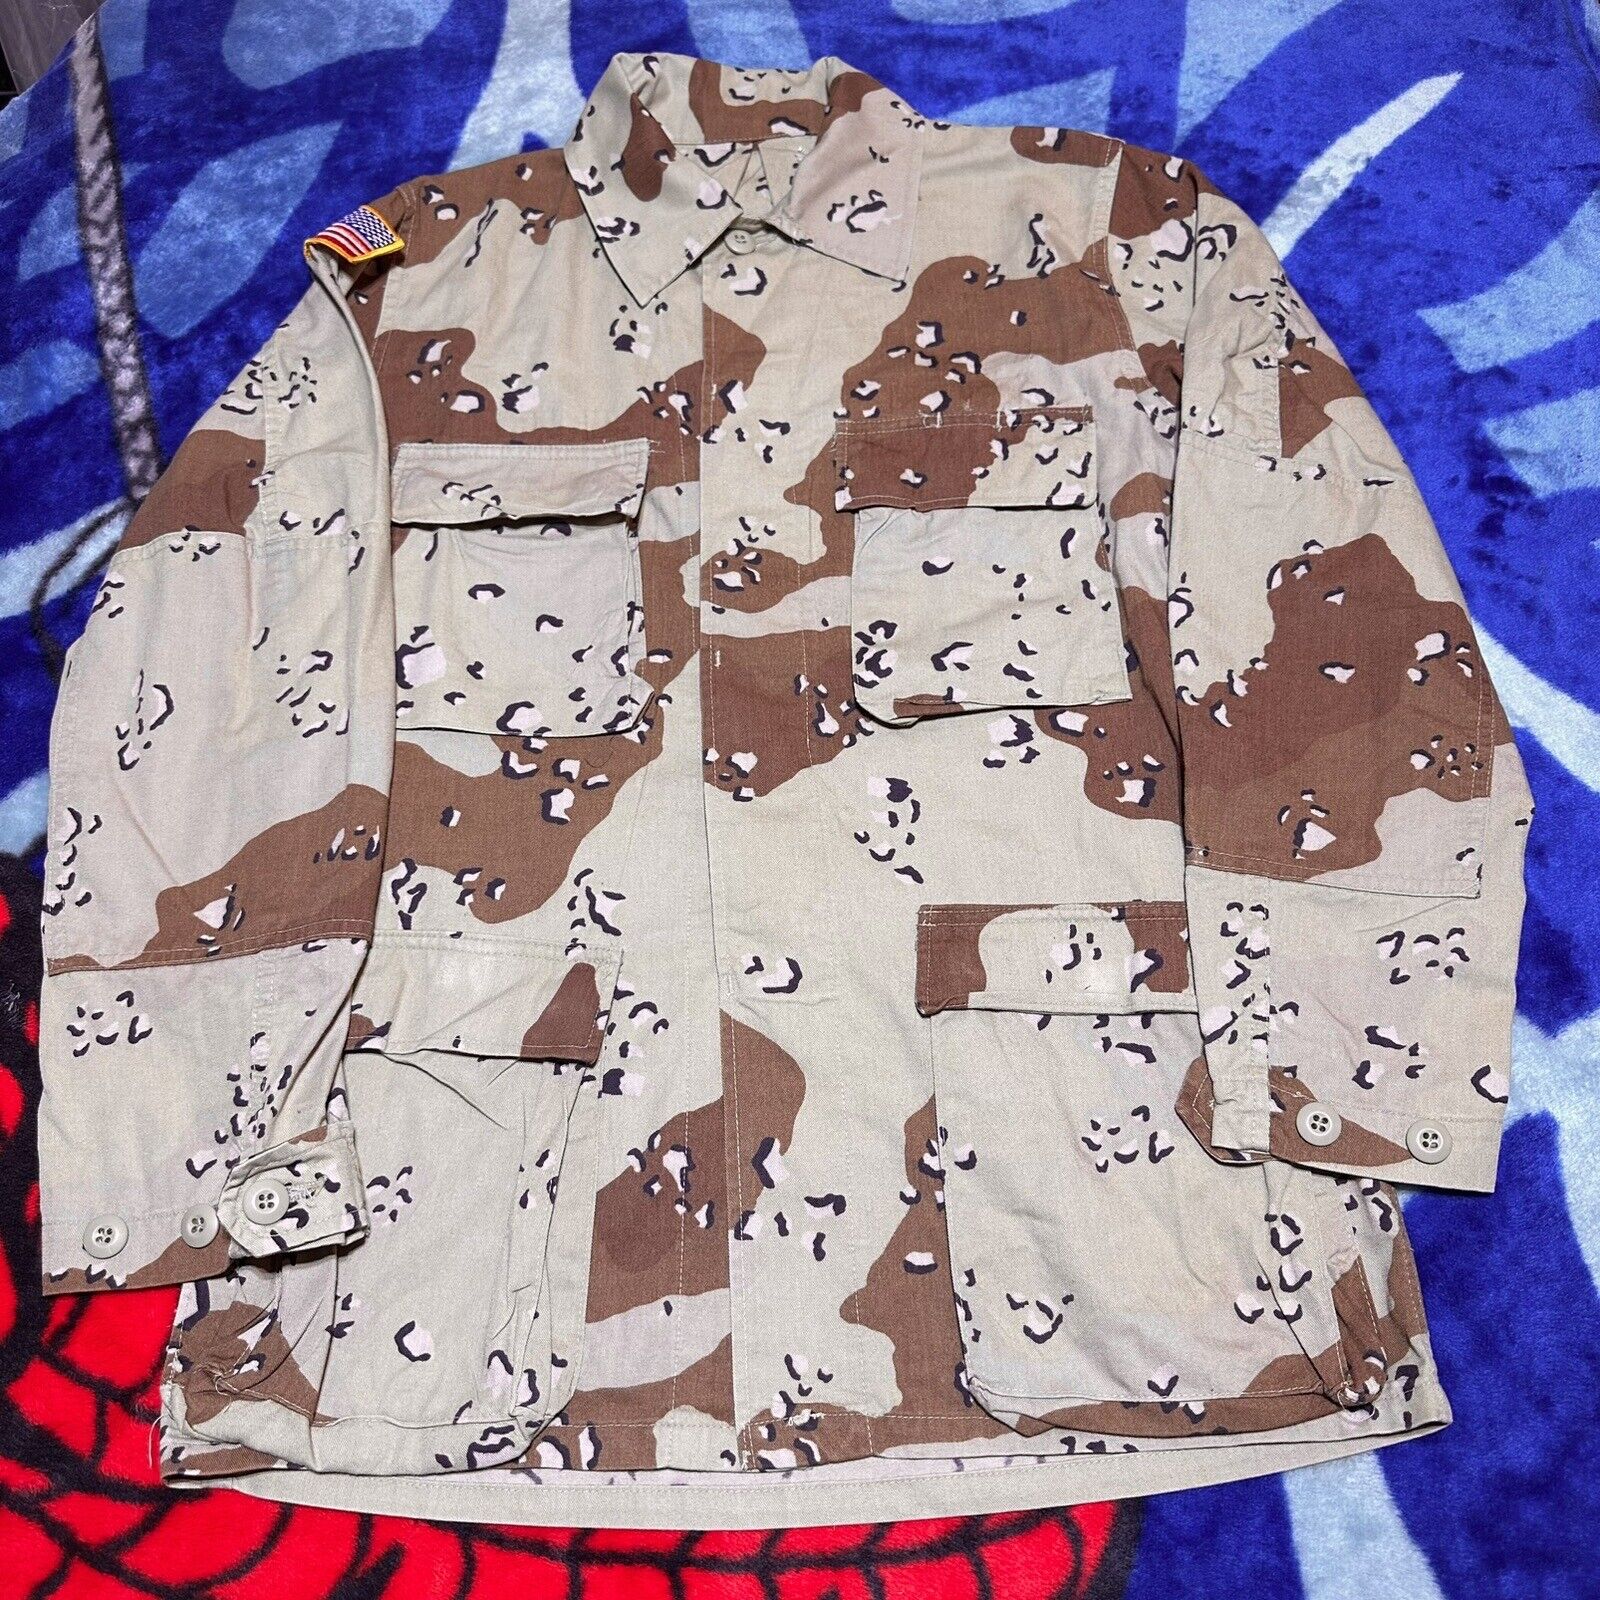 Vintage Military Desert Camouflage Chocolate Chip 6 Color BDU Jacket Size Small